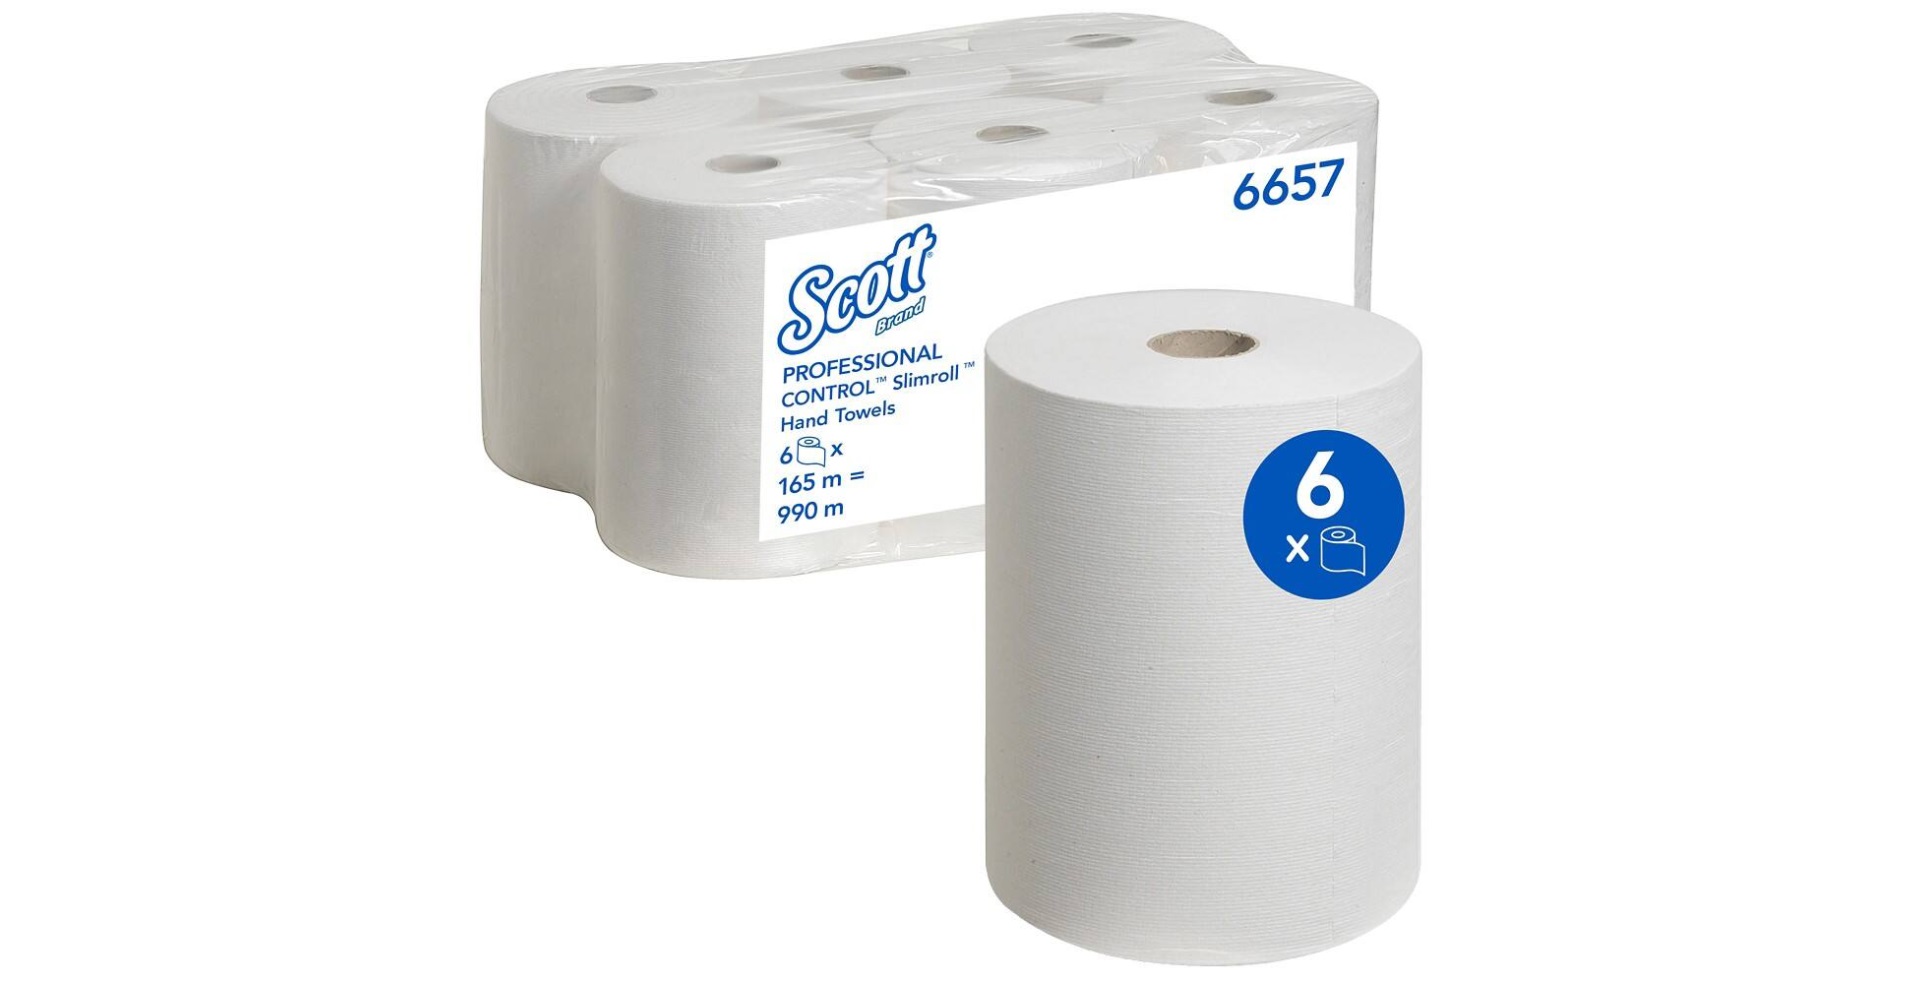 Scott 6657 Slimroll Hand Towels 1 Ply 165m - White - Case of 6